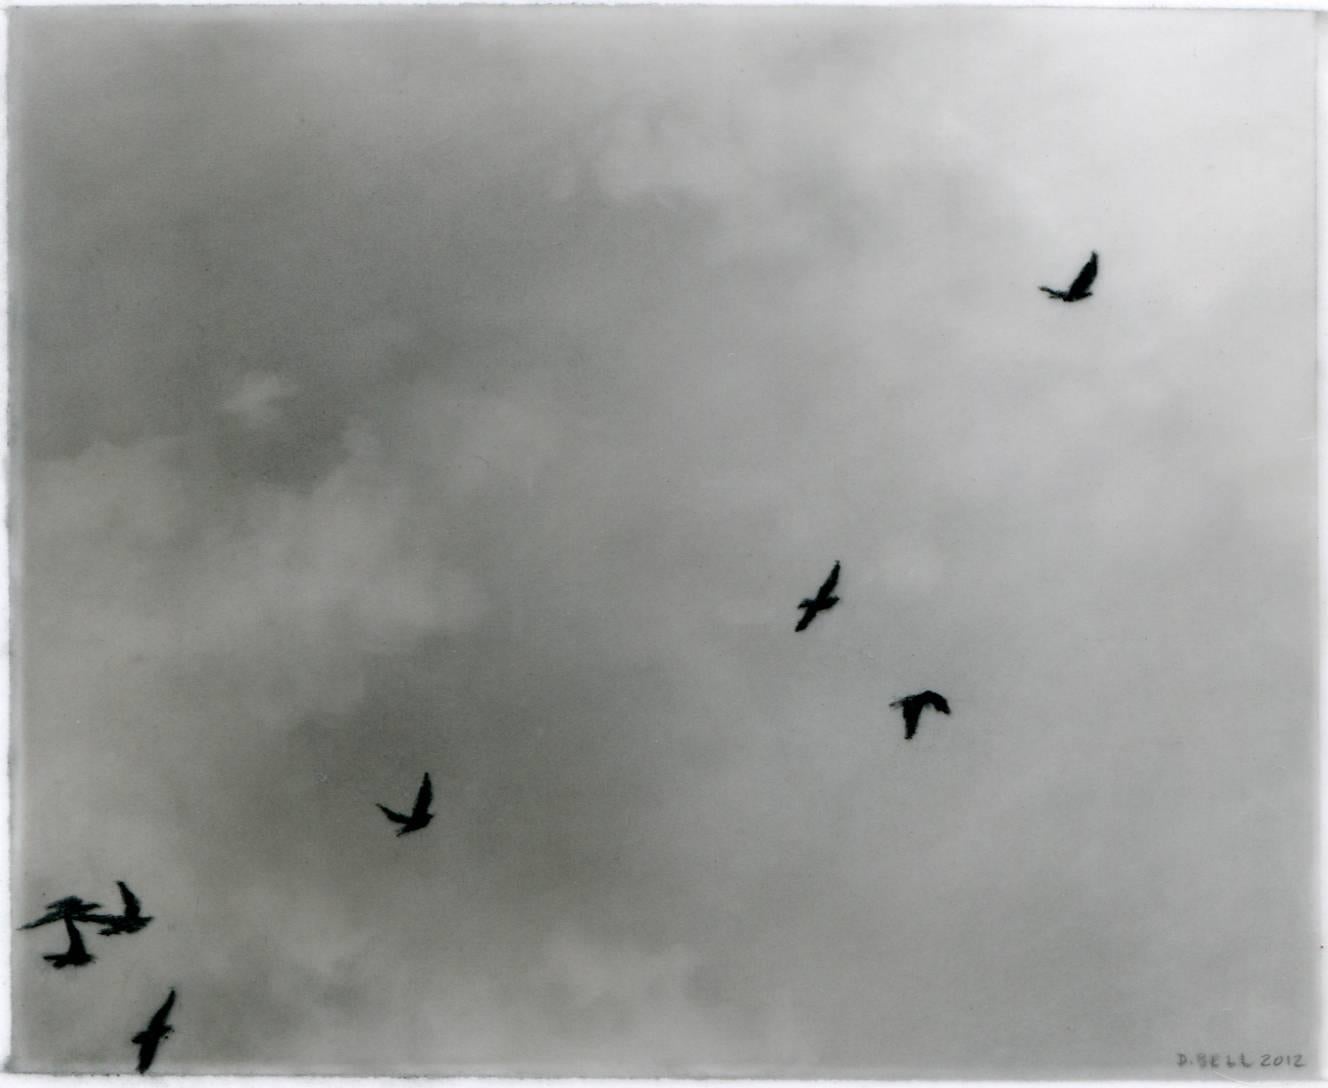 In her charcoal on mylar drawing, Flock, 7, Dozier Bell crystalizes the ephemeral moment of flight. The charcoal lends itself readily to capturing the fleeting atmospheric effects of the sky, while almost imprinting the forms of the birds into